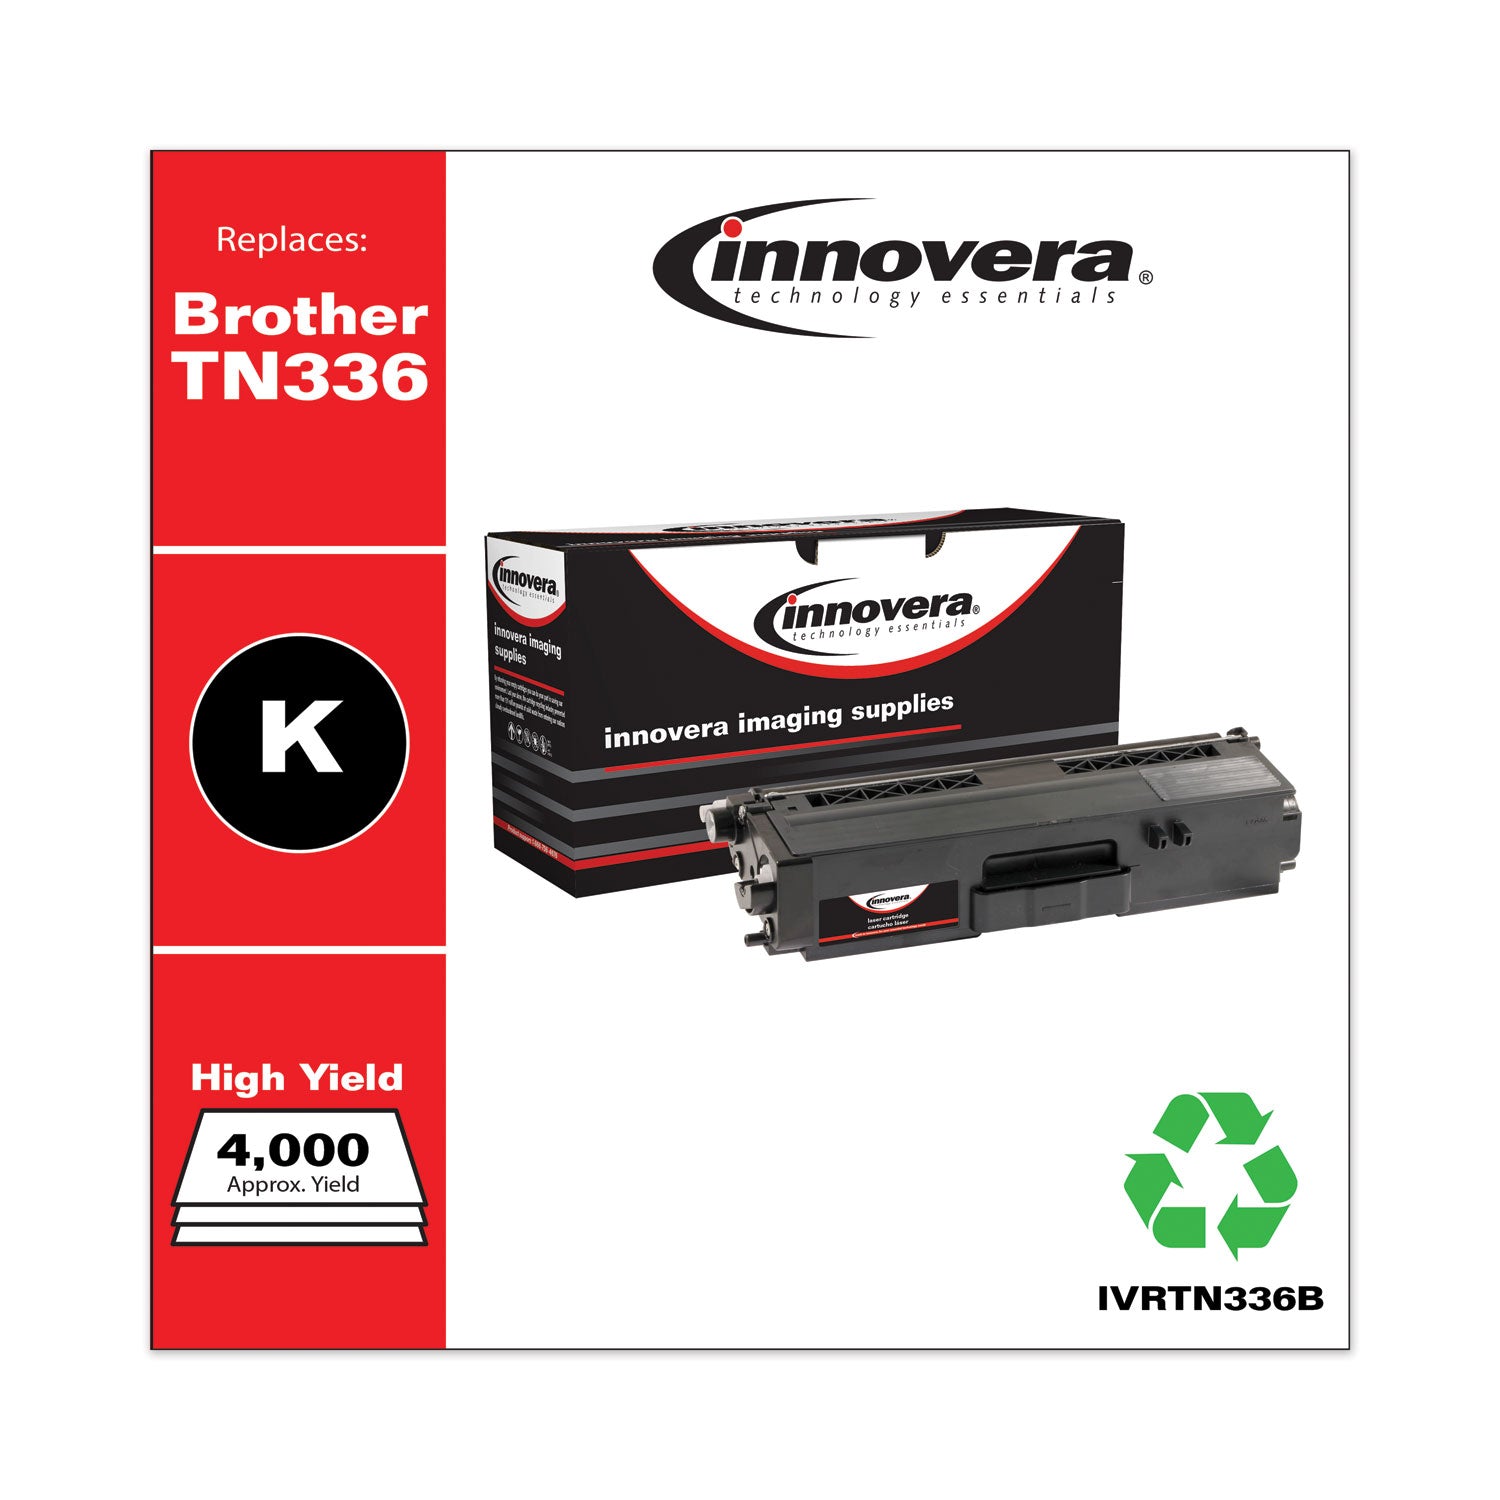 remanufactured-black-high-yield-toner-replacement-for-tn336bk-4000-page-yield-ships-in-1-3-business-days_ivrtn336b - 2